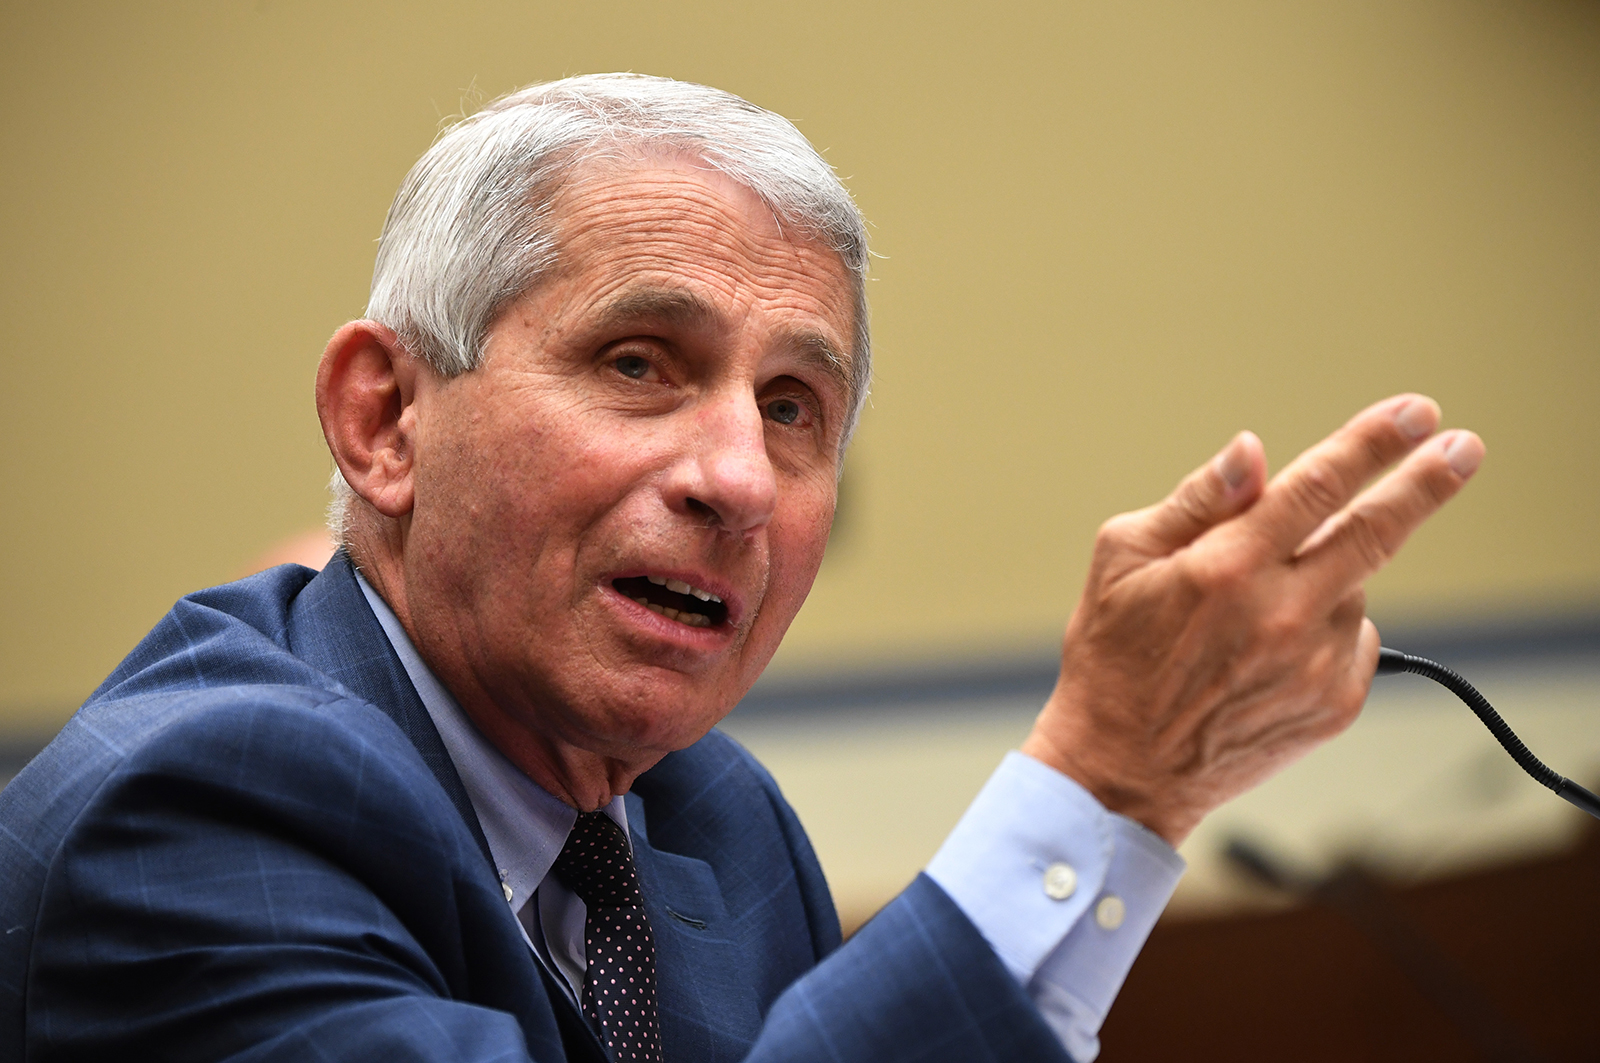 Dr. Anthony Fauci, director of the National Institute for Allergy and Infectious Diseases, testifies before a House Subcommittee on the coronavirus crisis hearing in Washington, DC, on July 31.